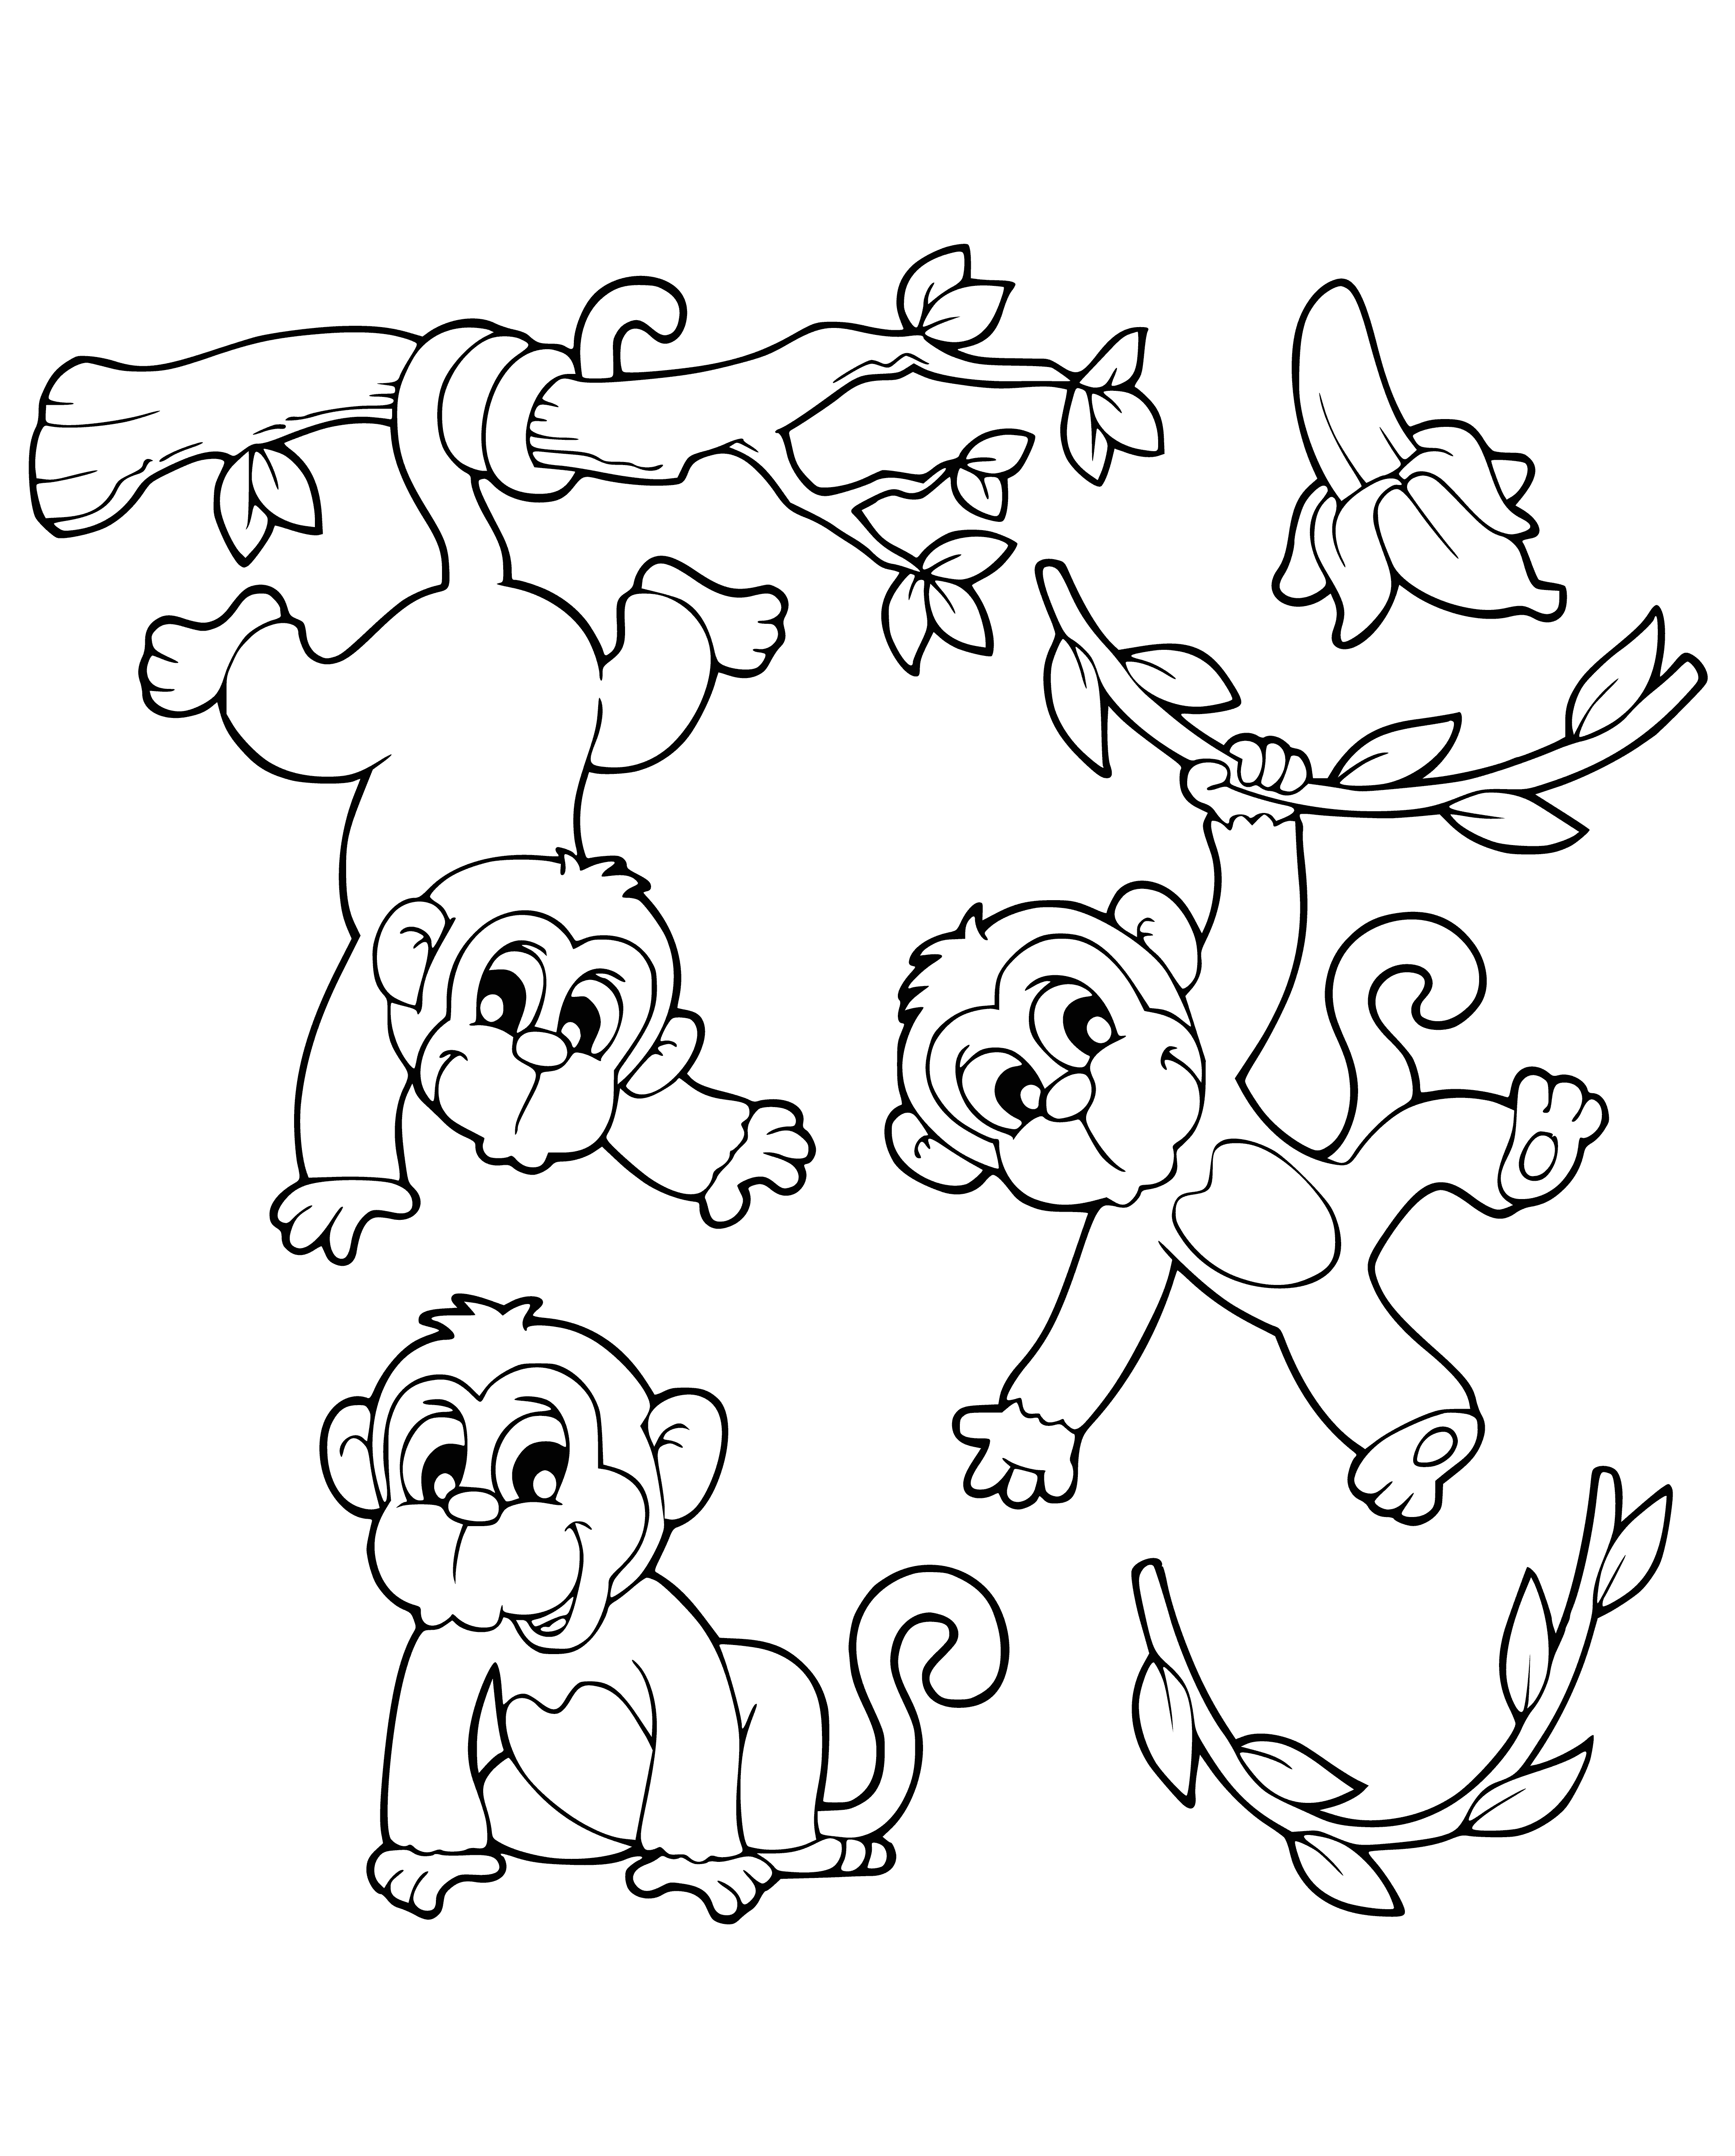 Monkeys play coloring page